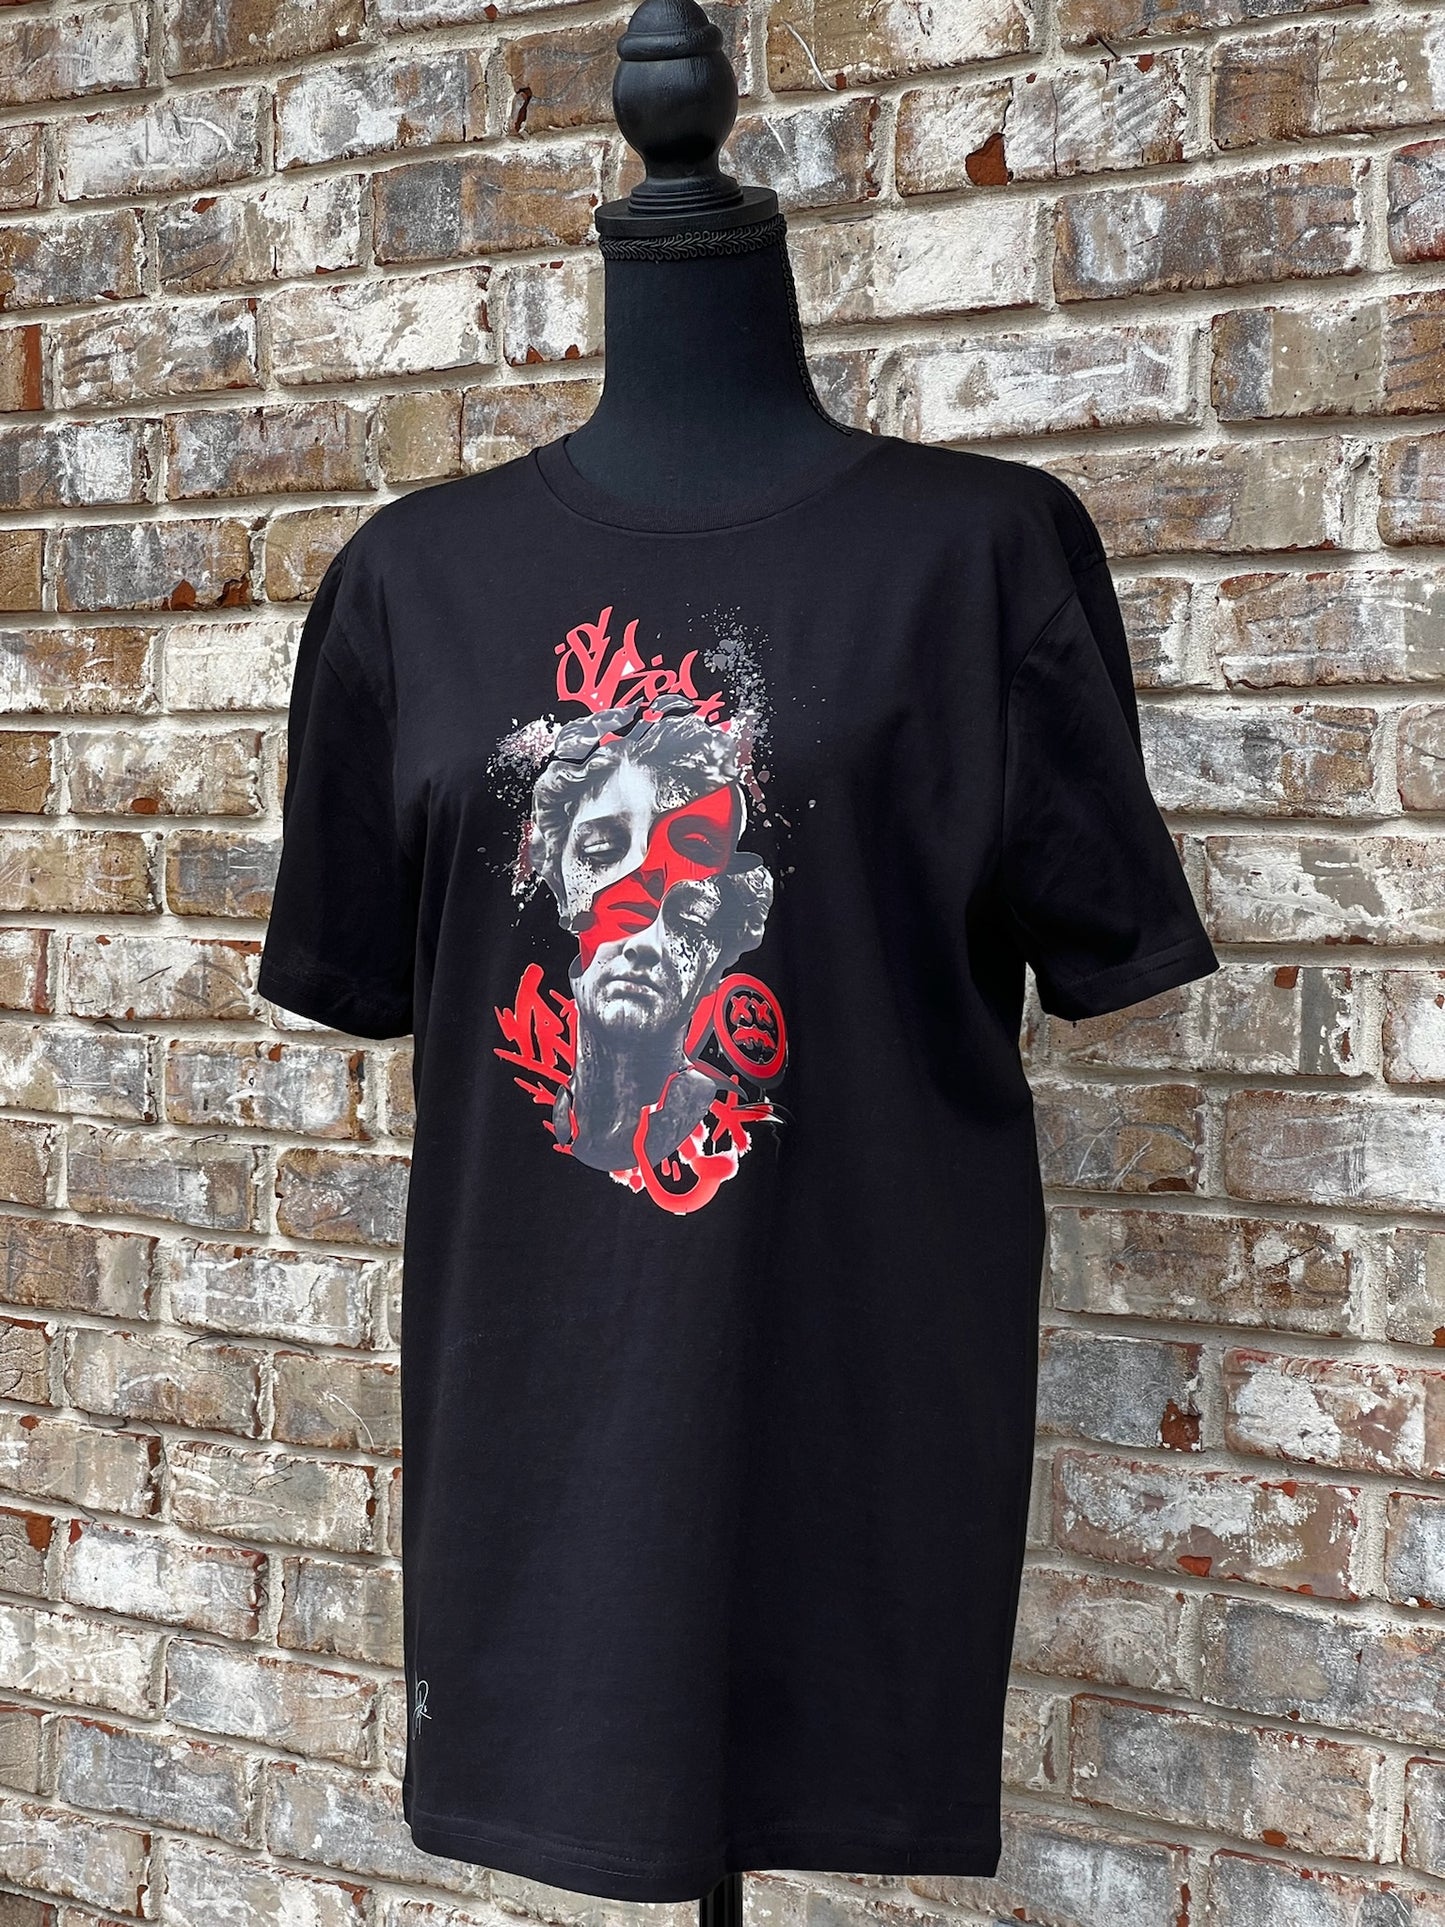 Vivid Contrast Graphic T-Shirt with Red Accents | AdRa Apparel